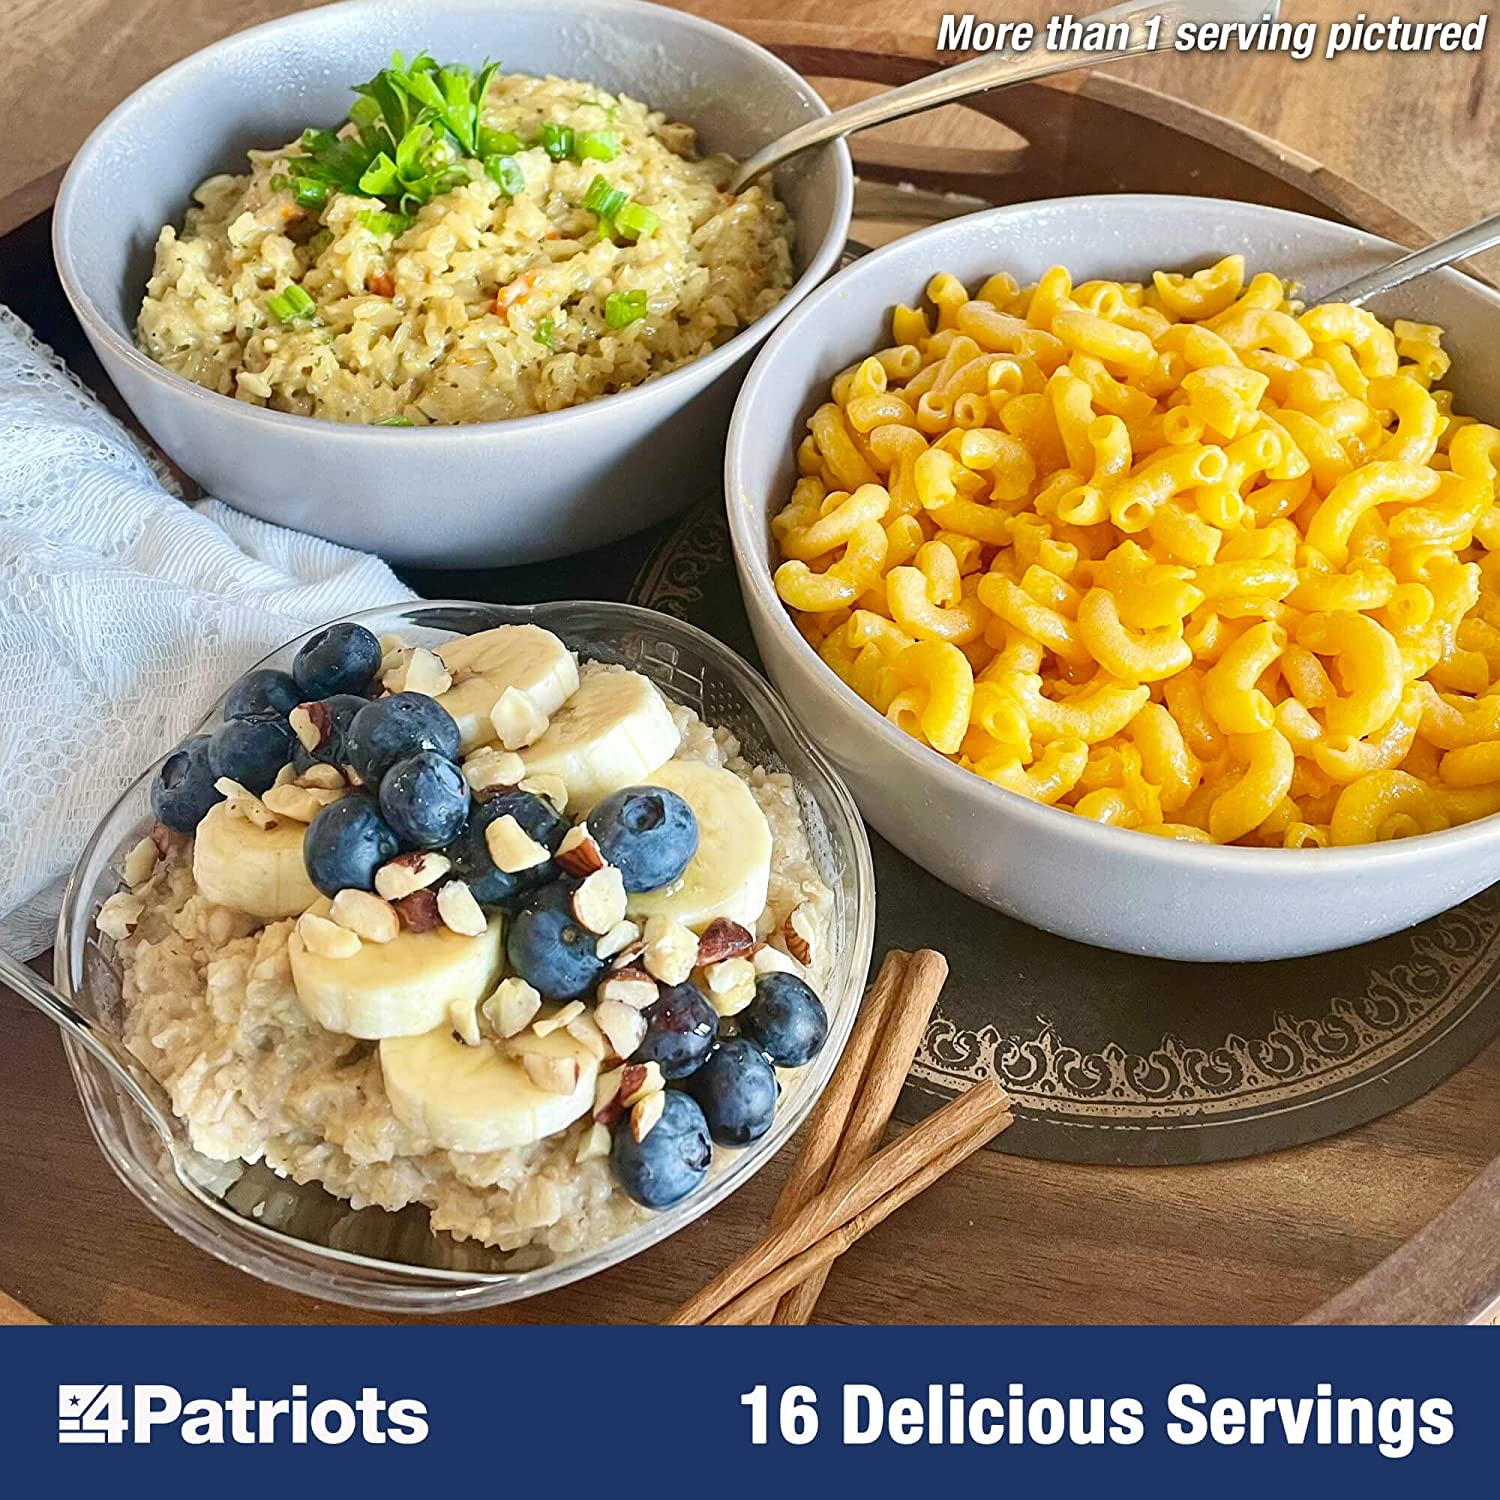 4Patriots 72-Hour Emergency Food Supply Survival Kit, Perfect for Camping, Freeze Dried Preparedness Food, Designed to Last 25 Years, Be Ready with 16 Servings of Delicious Breakfast, Lunch, & Dinner